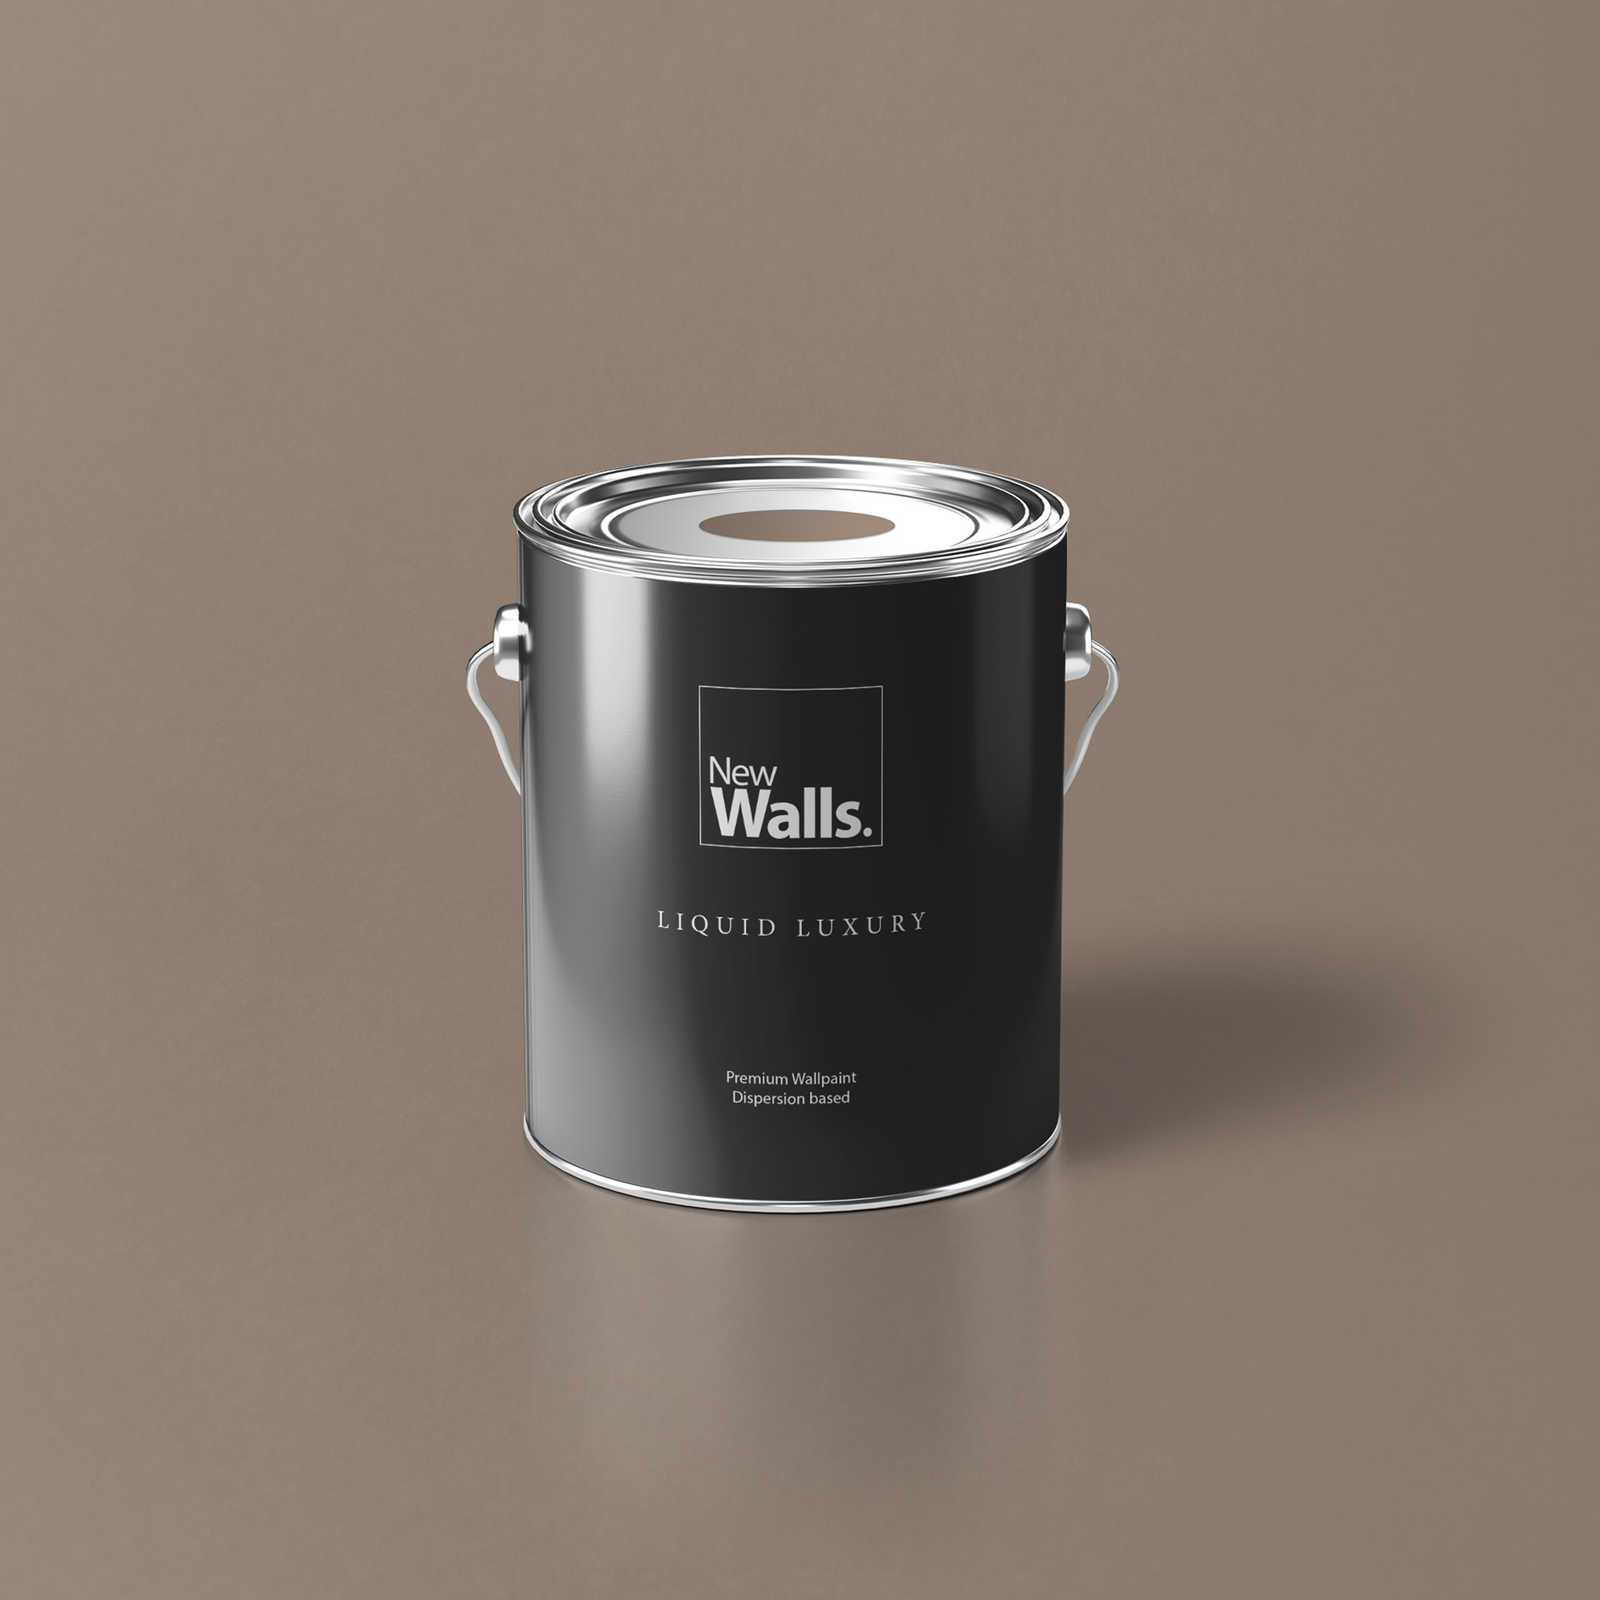 Premium Wall Paint Down-to-earth Taupe »Talented calm taupe« NW702 – 2.5 litre
